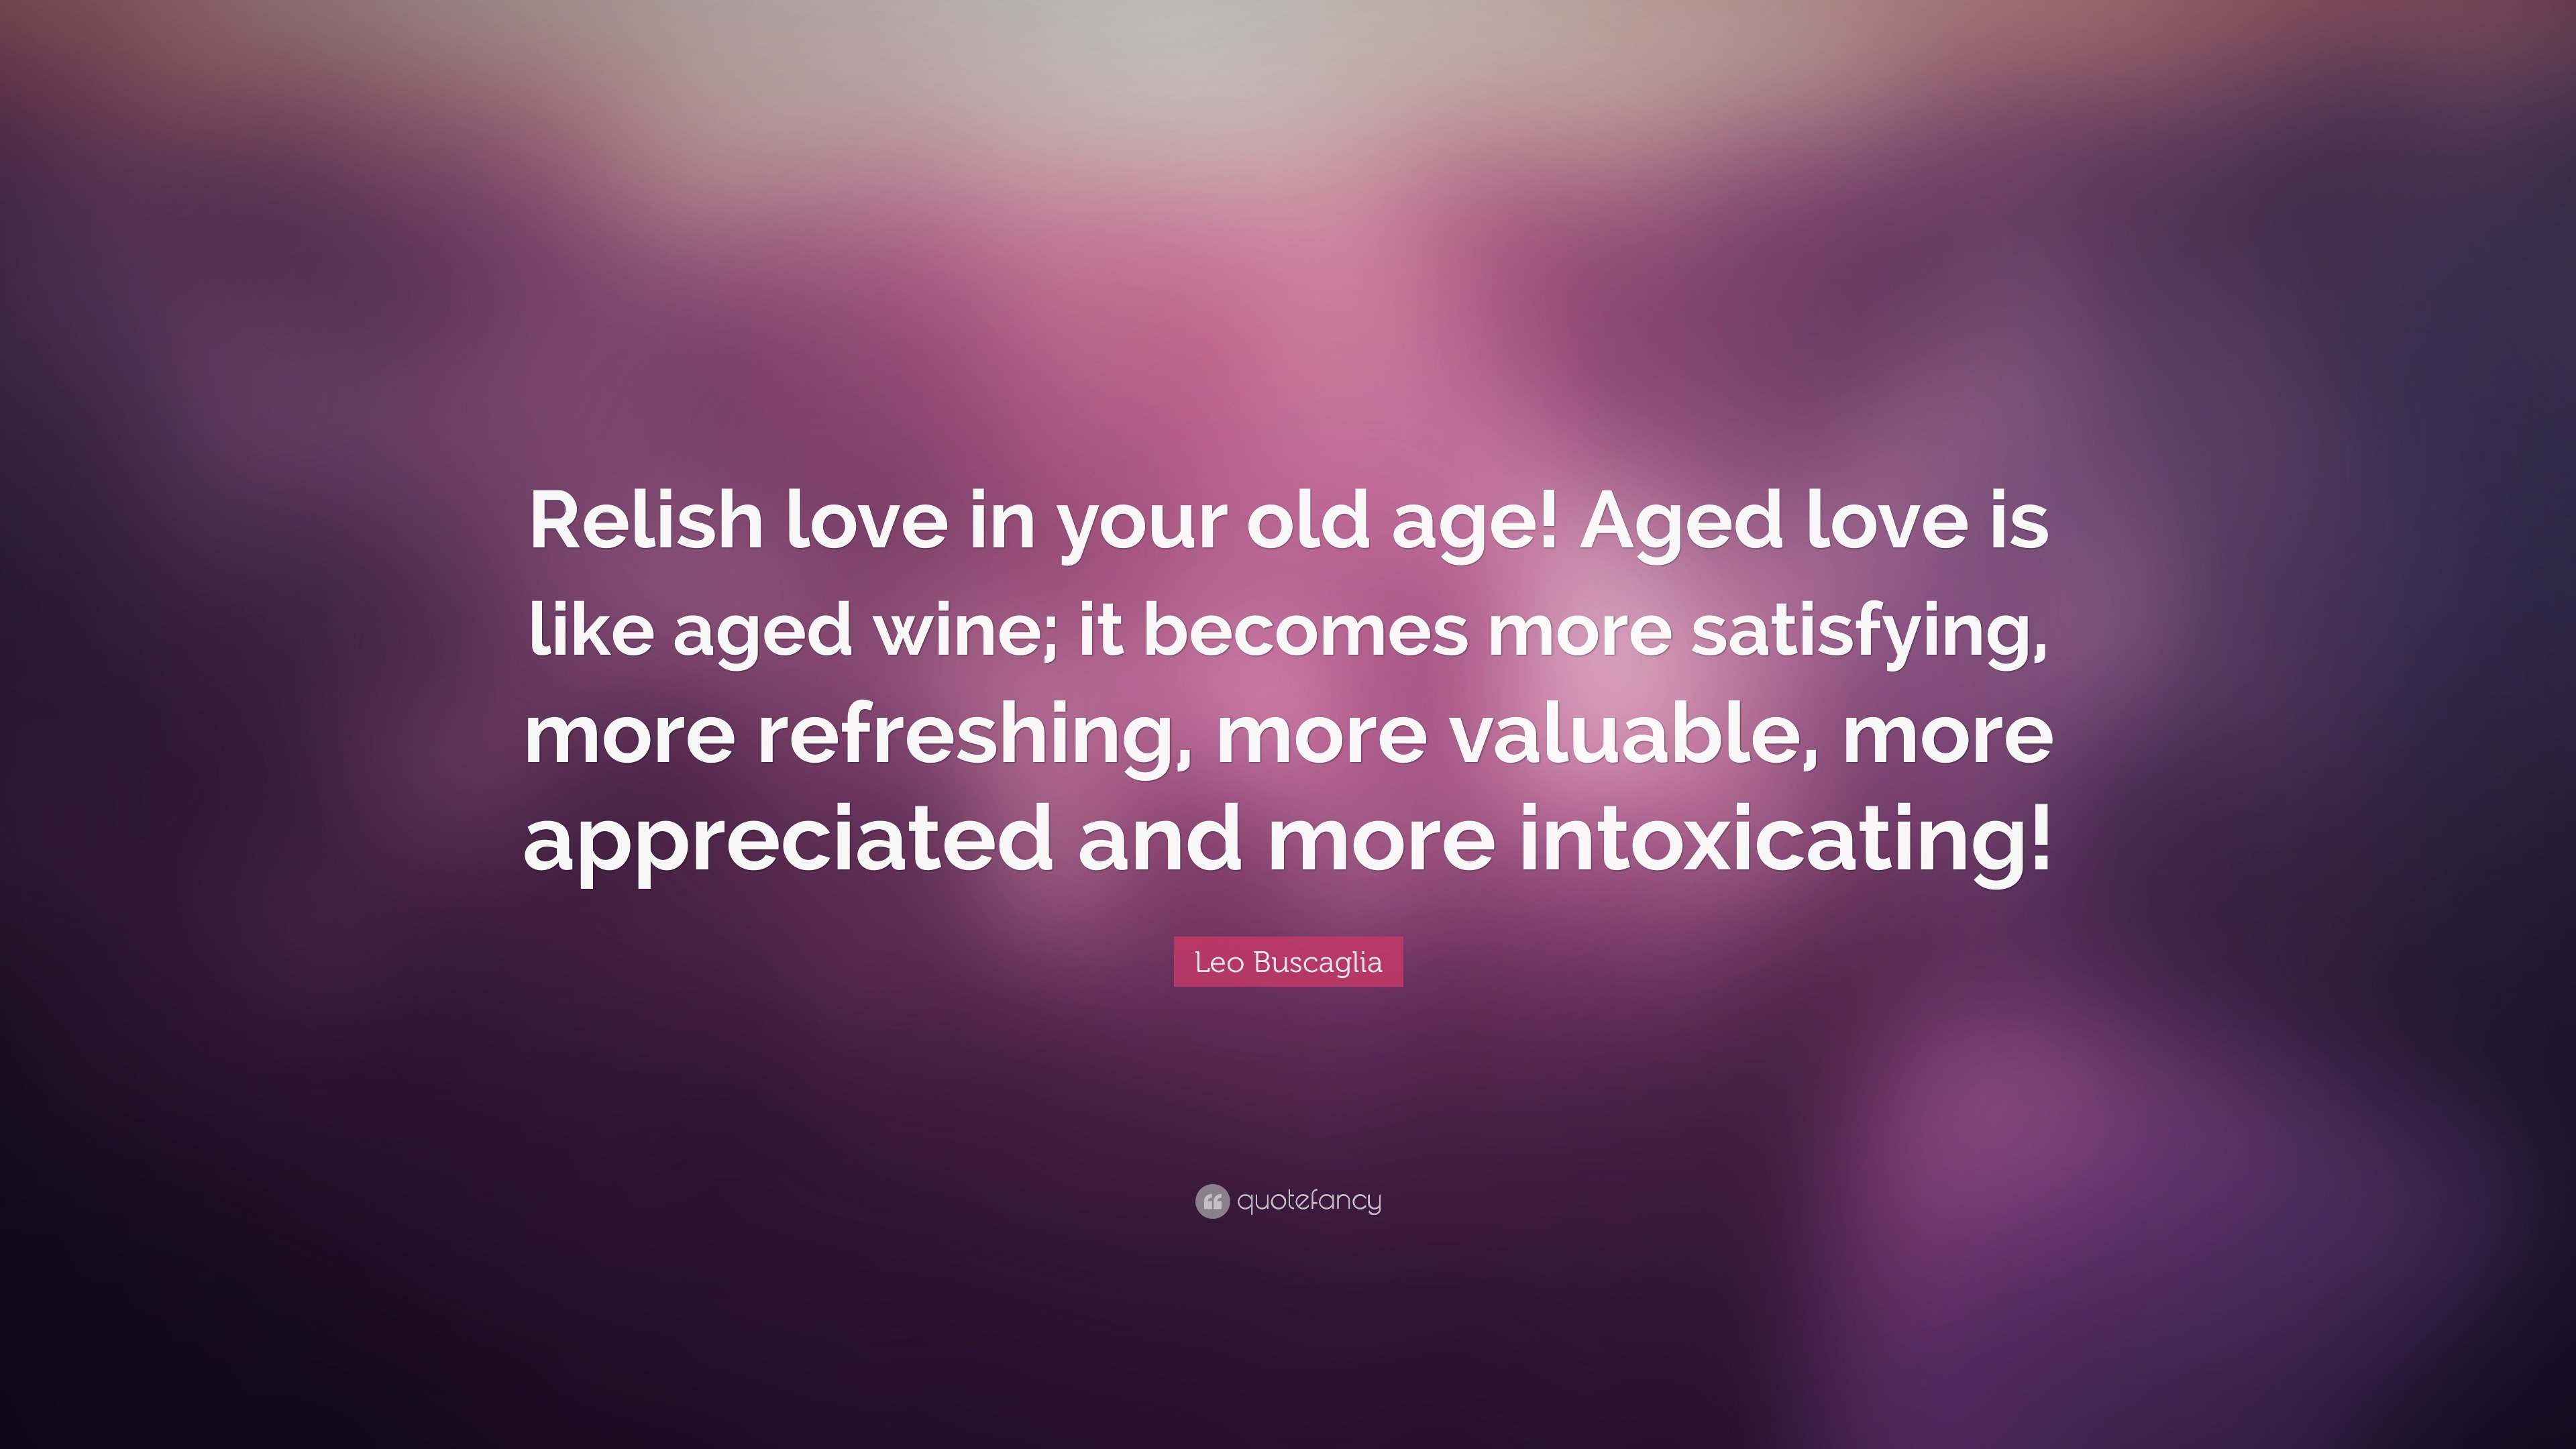 Leo Buscaglia Quote “Relish love in your old age Aged love is like